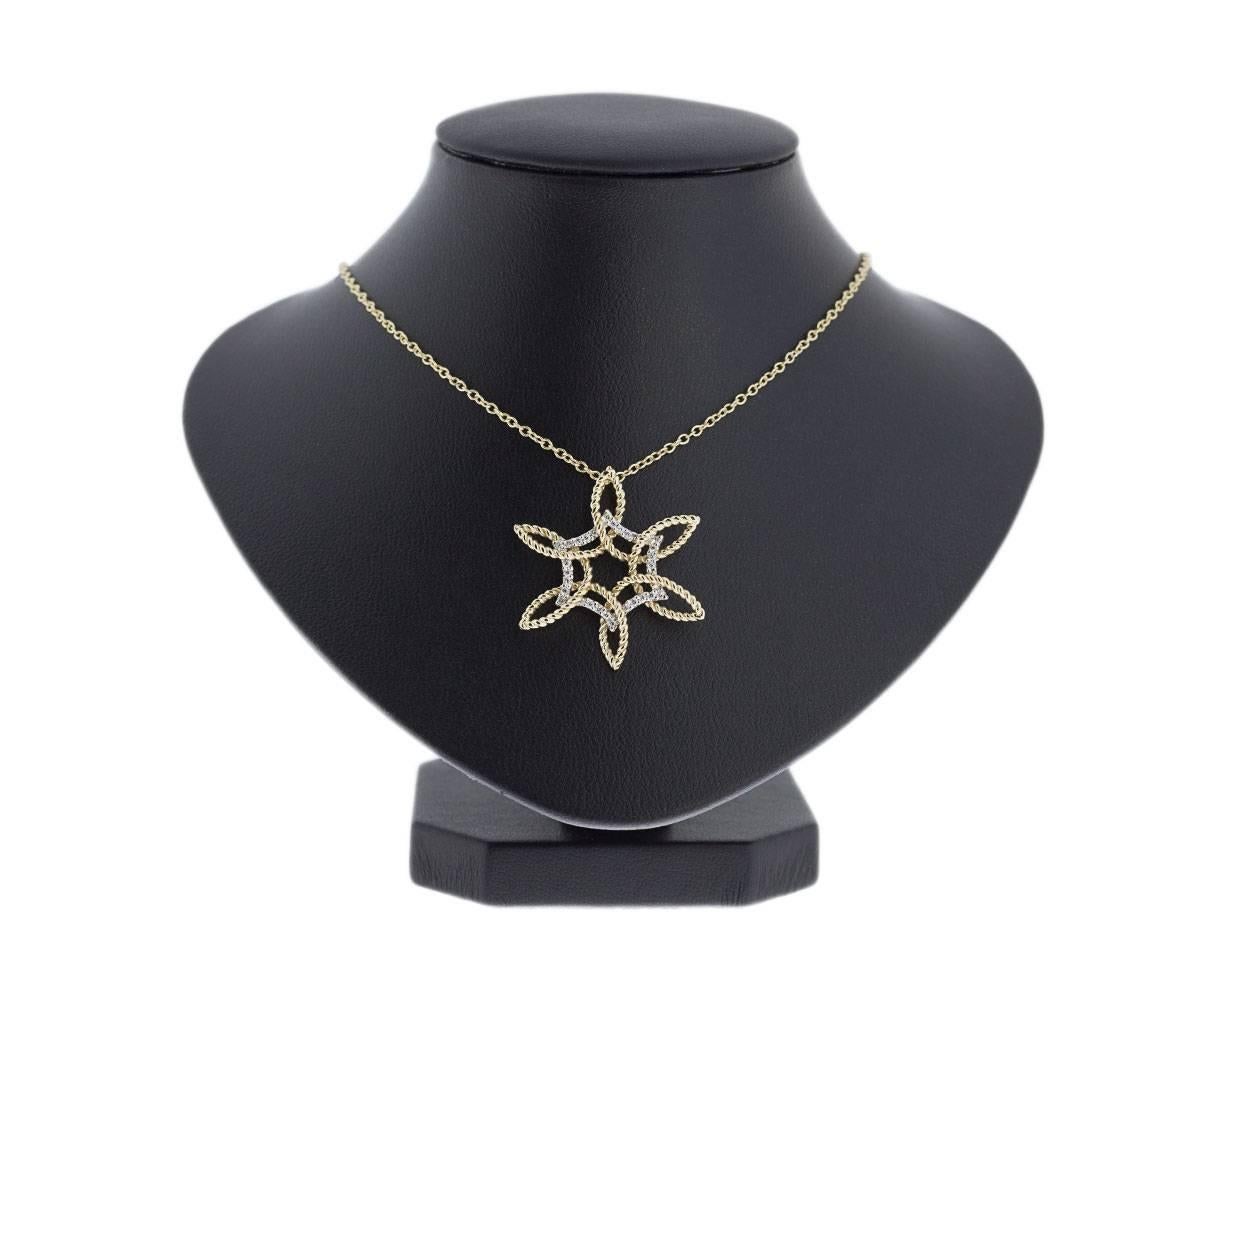 Simple yet elegant & beautiful would be the best way to describe this stunning necklace! It features sparkly, round brilliant cut diamonds that are pave set in a white gold, curved edge hexagon shape. Luscious, rope design yellow gold loops